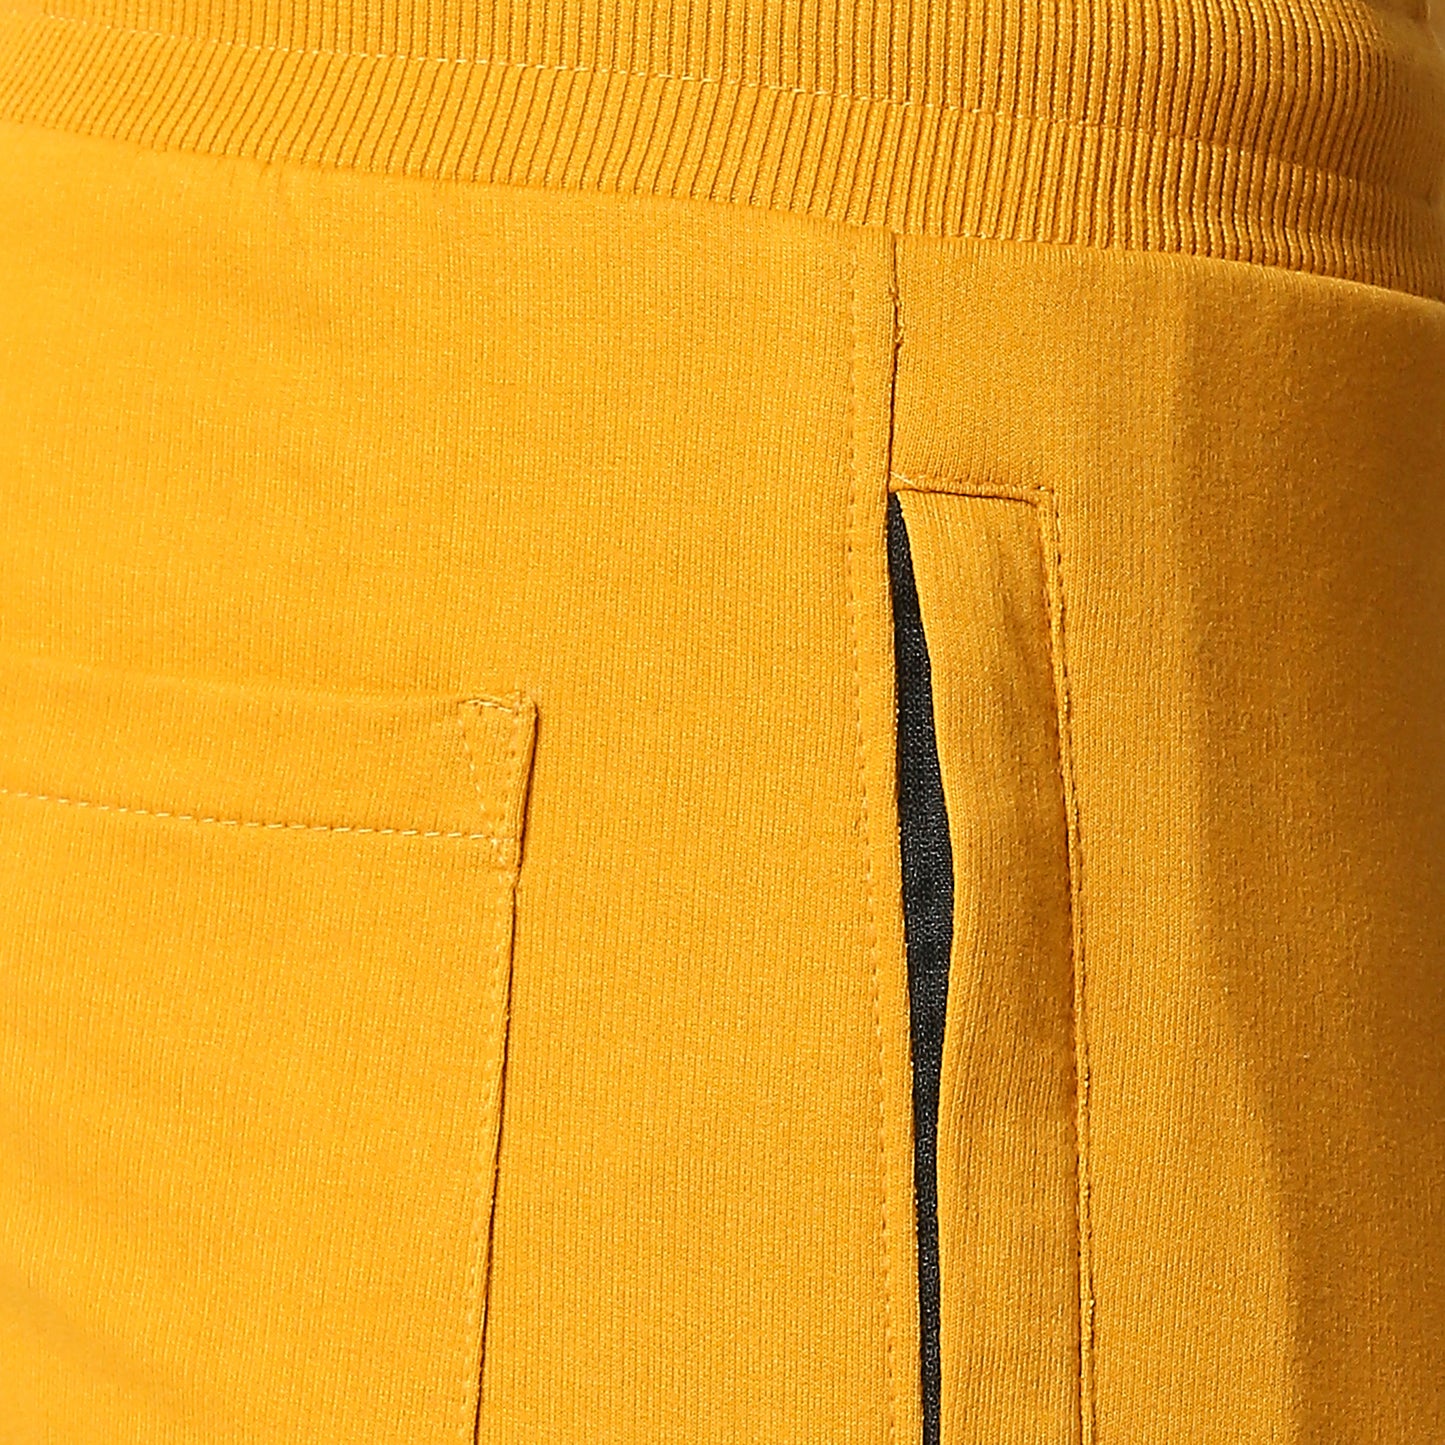 Fostino Beijing Plain Mustard Yellow Shorts with Piping in Front - Fostino Shorts